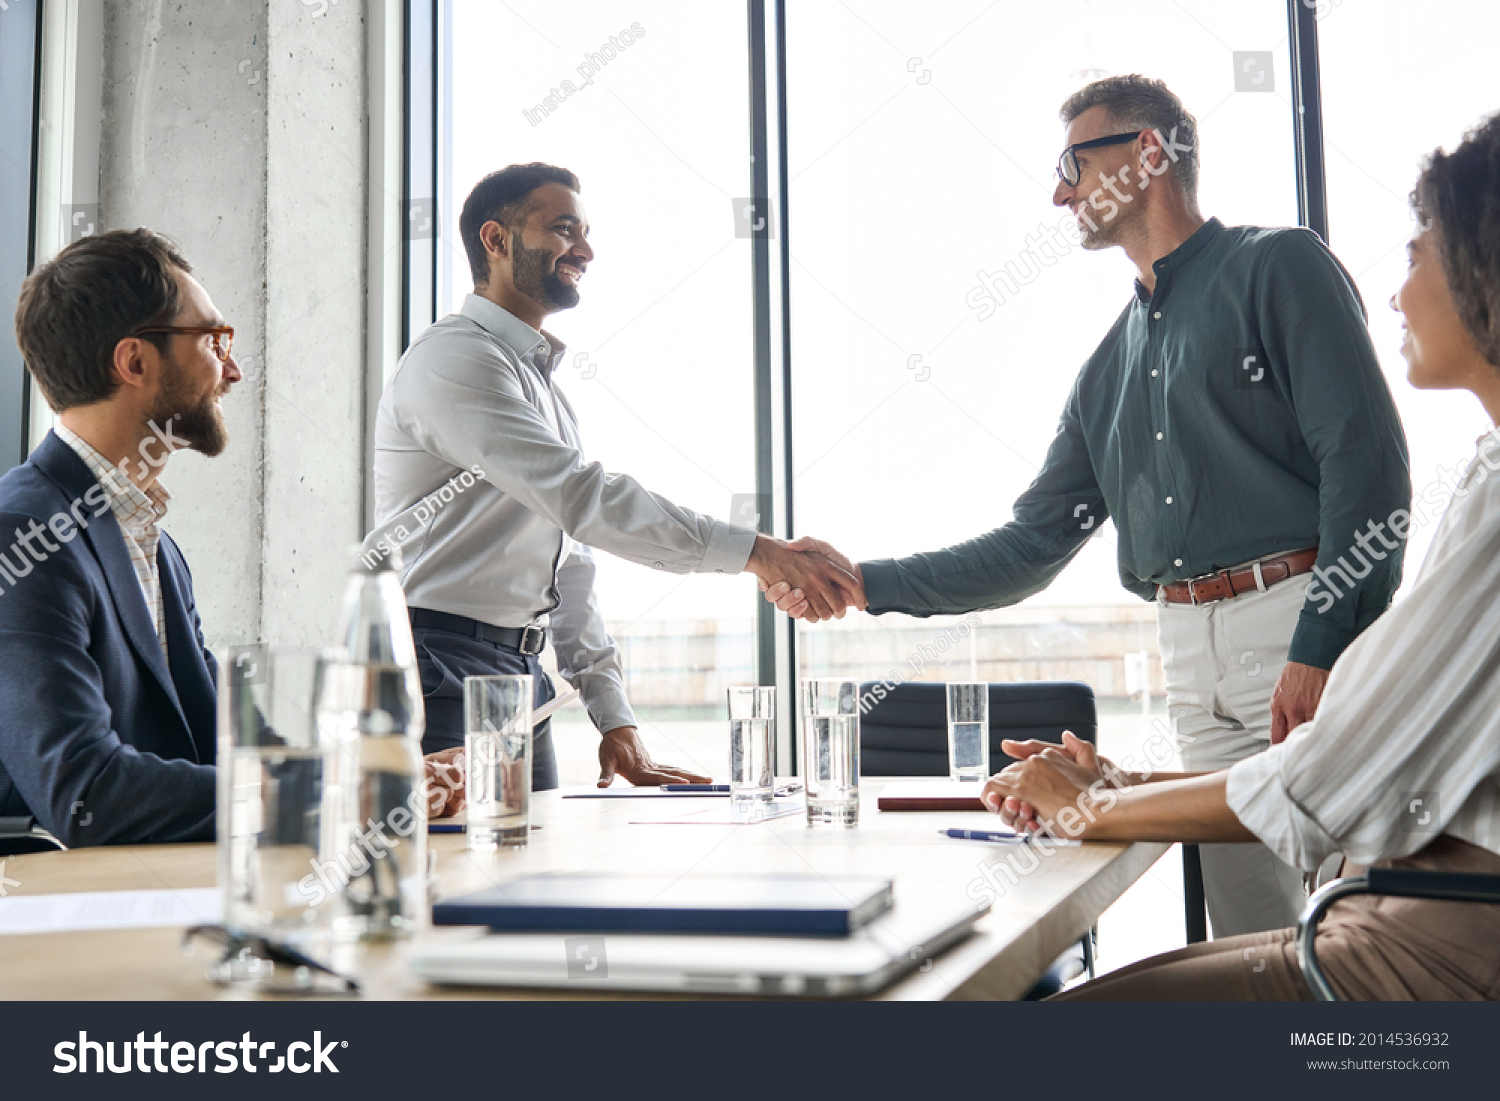 Two happy diverse professional business men executive leaders shaking hands after successful financial deal at group board office meeting. Trust agreement company trade partnership handshake concept. #2014536932